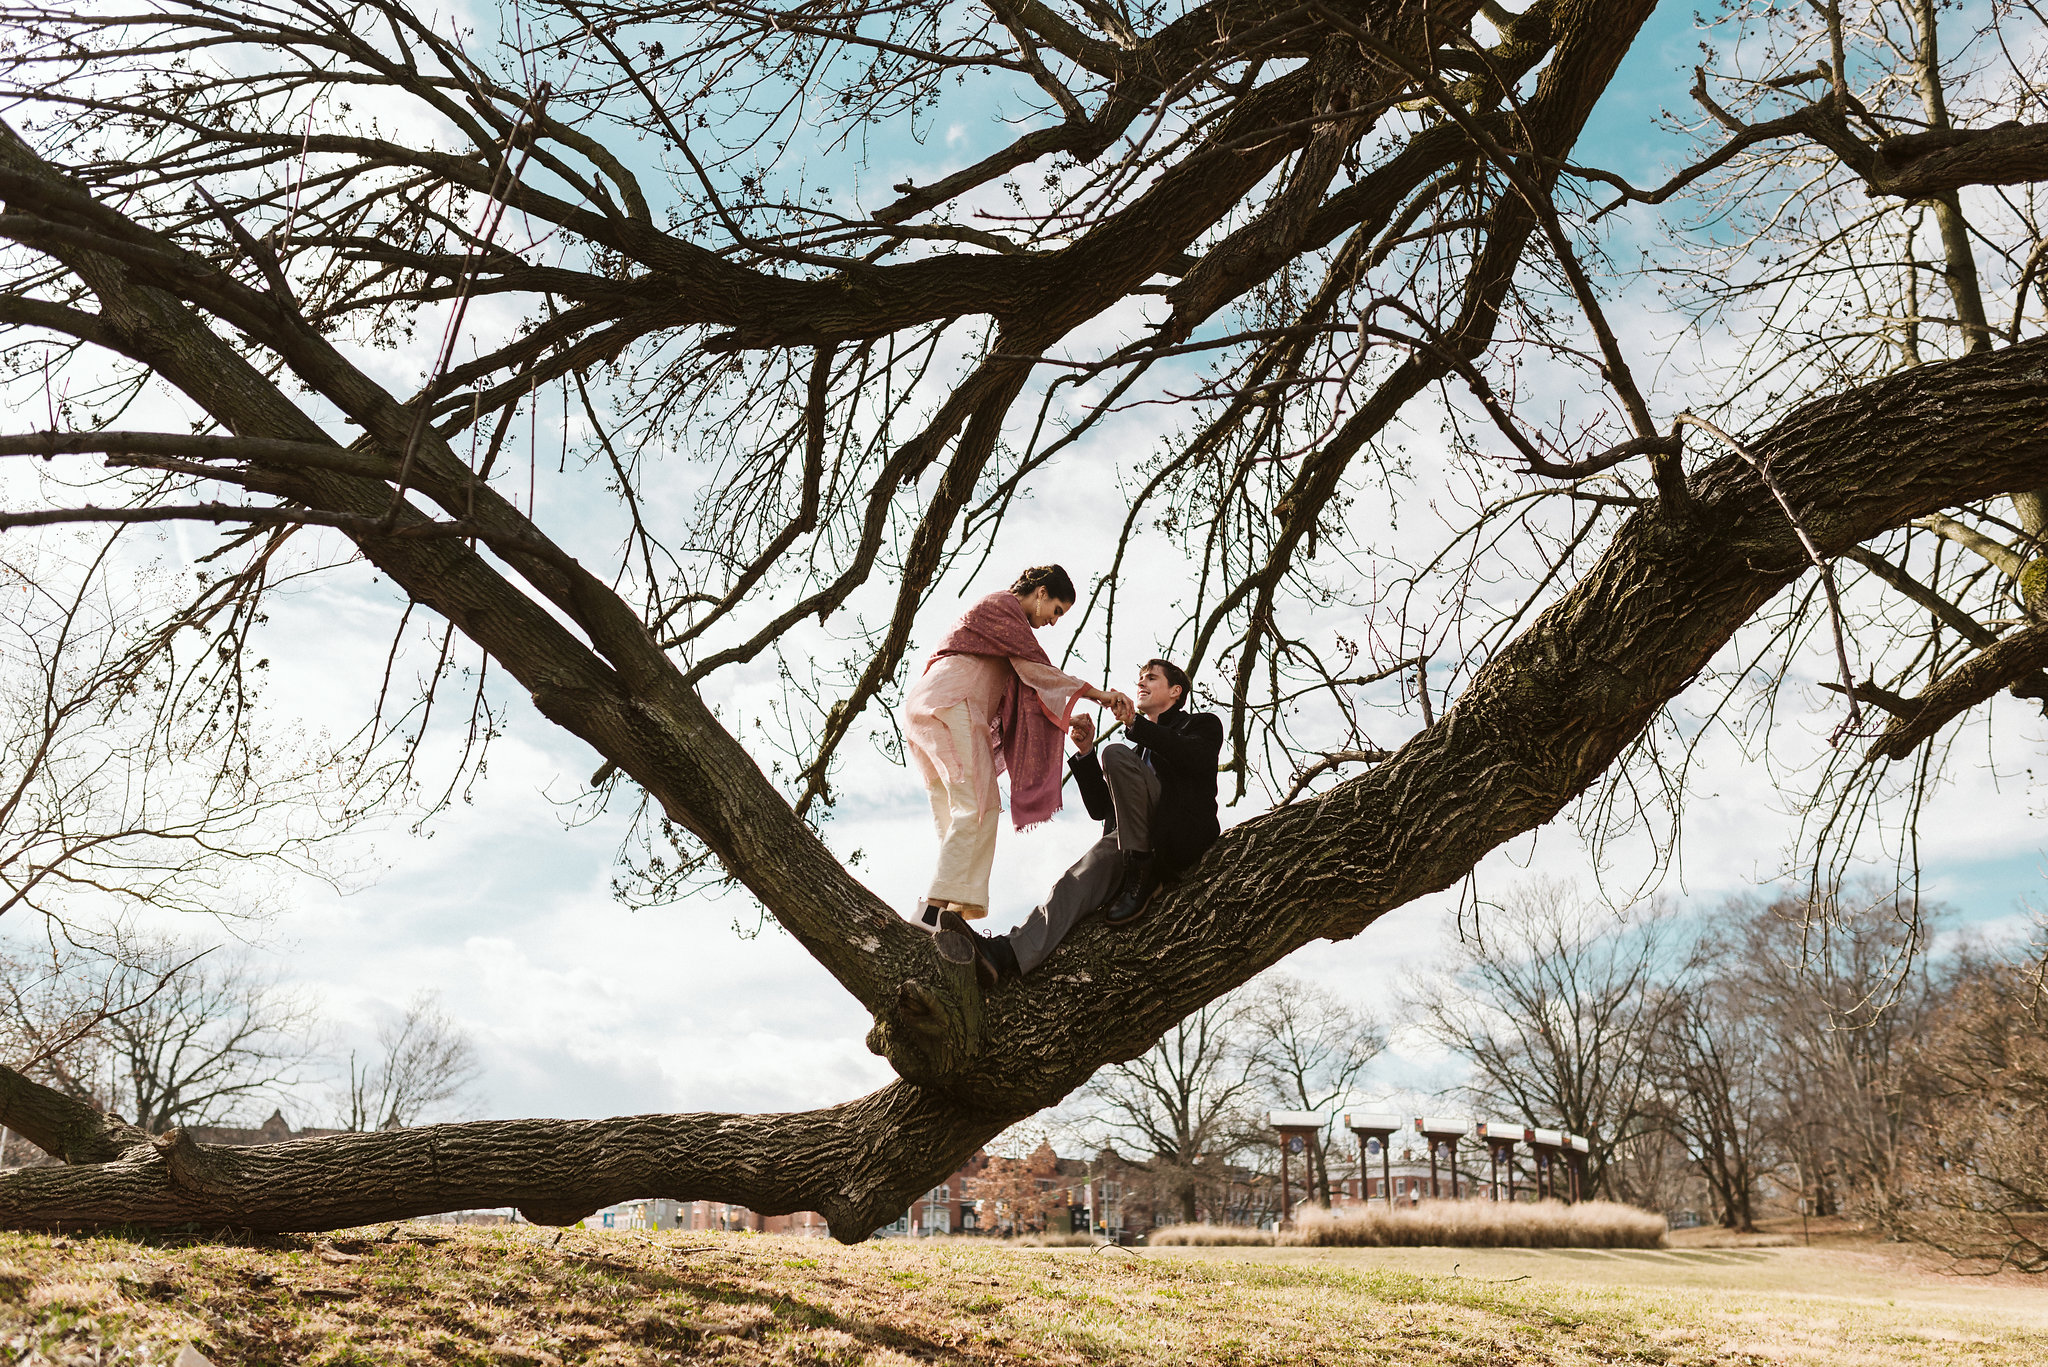 Elopement, Weekday Wedding, Towson, Rawlings Conservatory, Greenhouse, Baltimore Wedding Photographer, Indian American, Outdoor, Nature, Romantic, Garden, Climbing Trees